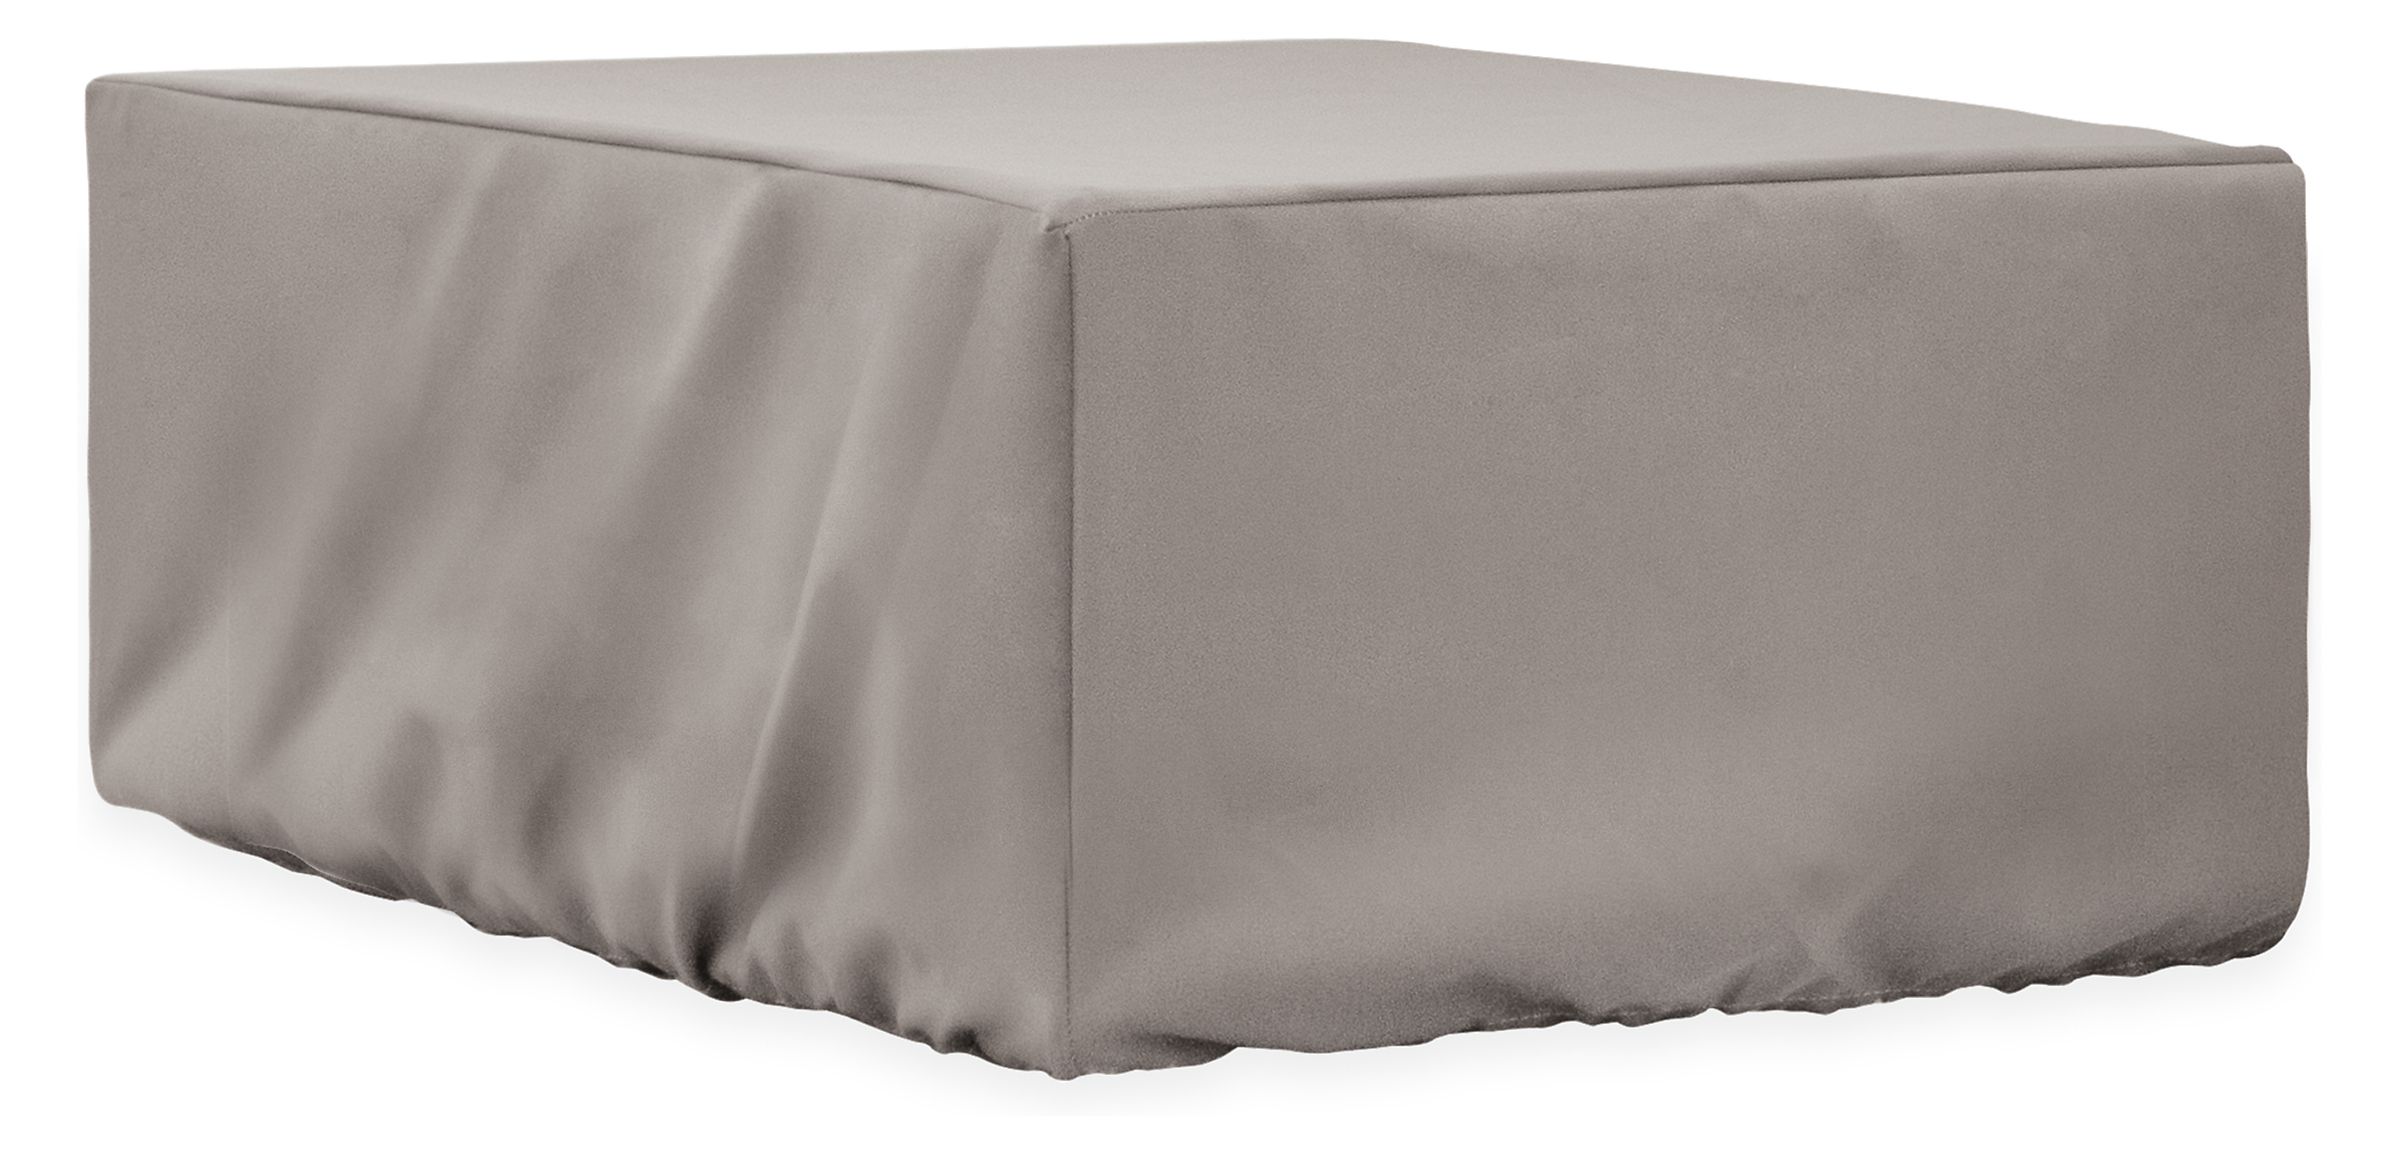 Outdoor Cover for Ottoman 39w 39d 15h with Drawstring